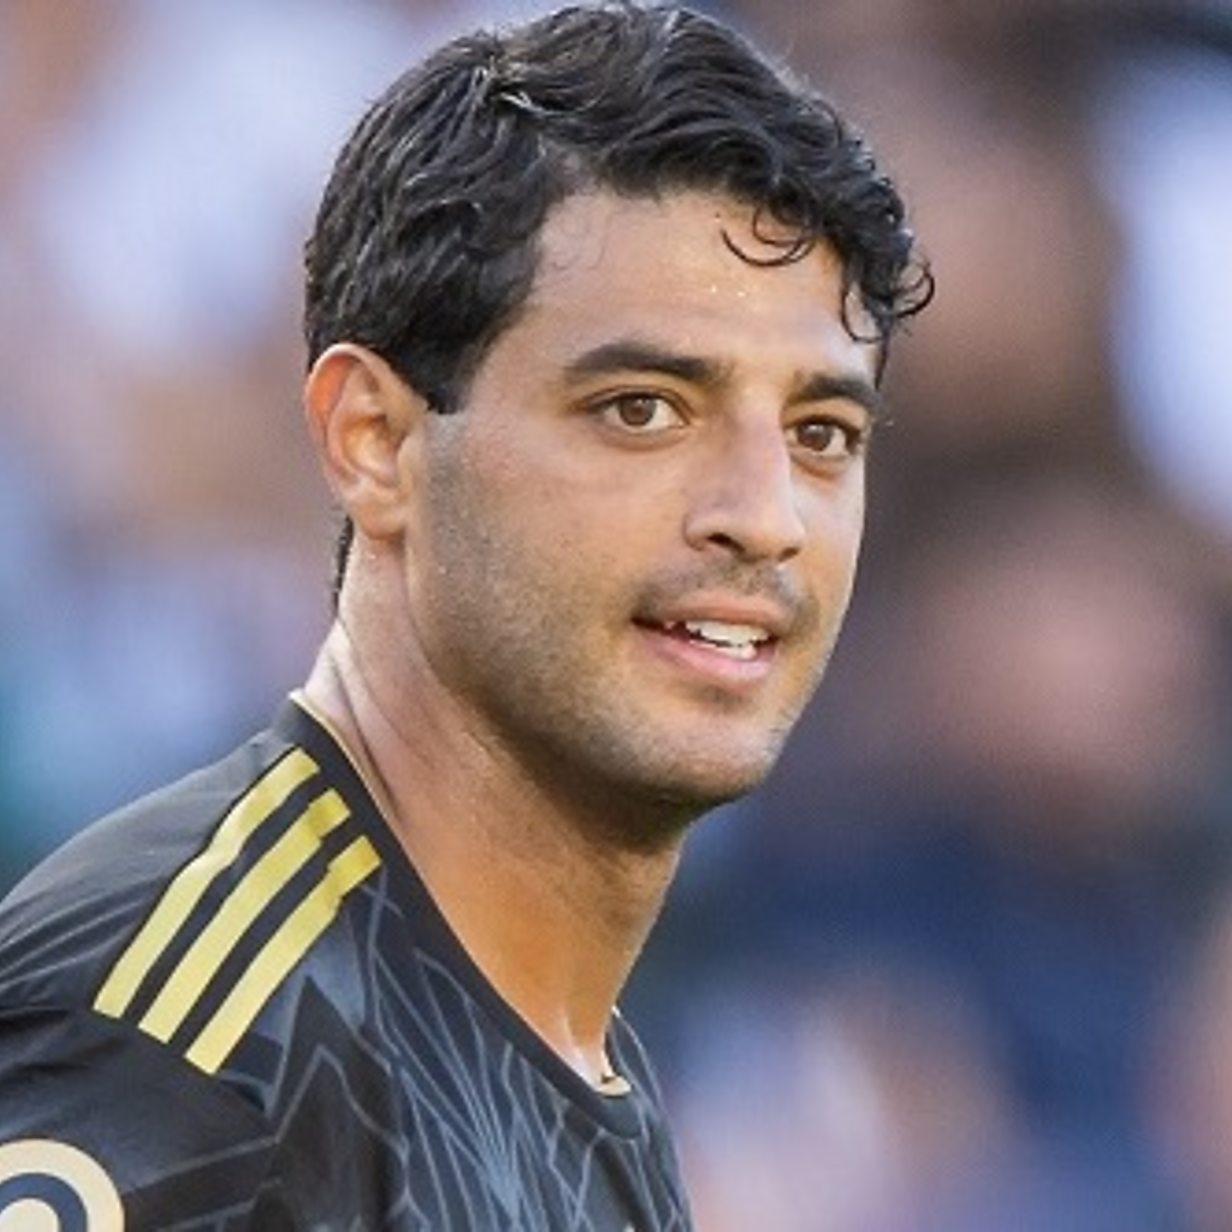 LAFC in the hunt for another star to team up with Bale, Vela and